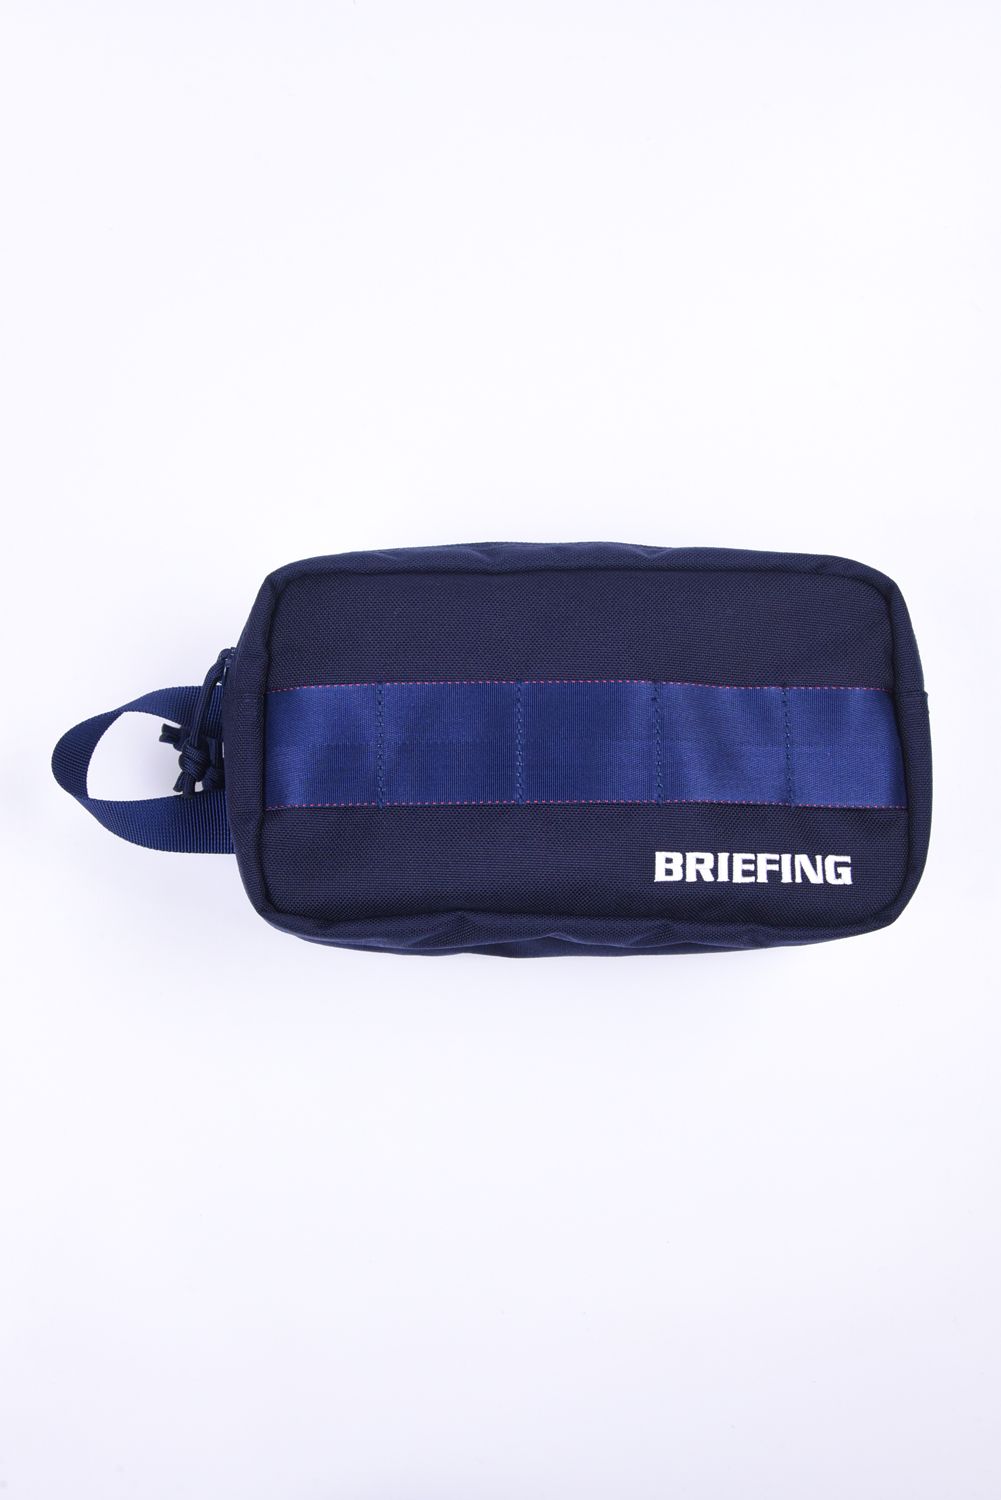 BRIEFING - 【1000Dコーデュラナイロン】 DOUBLE ZIP POUCH-3 GOLF 